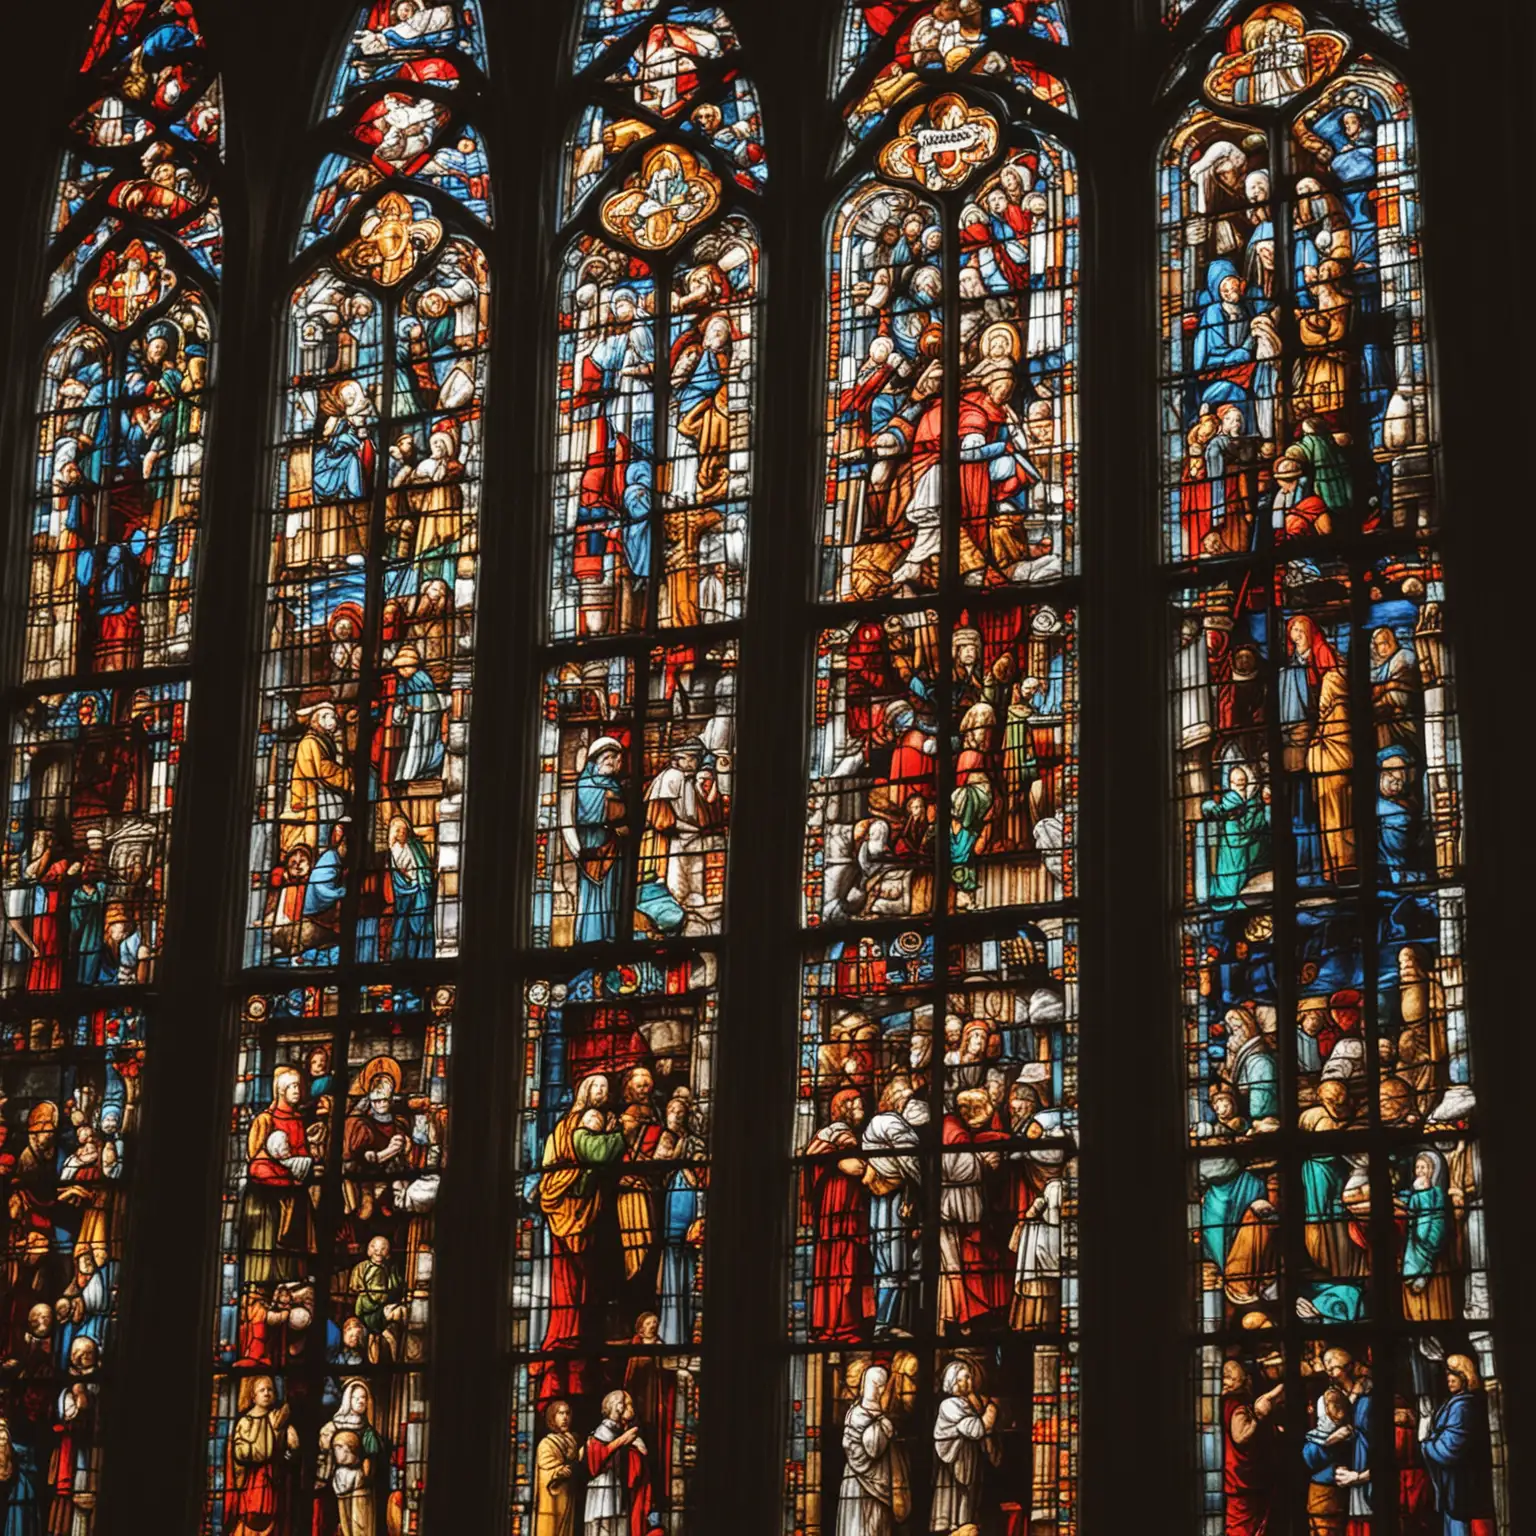 Vibrant Stained Glass Church Windows Captivating CloseUp Imagery